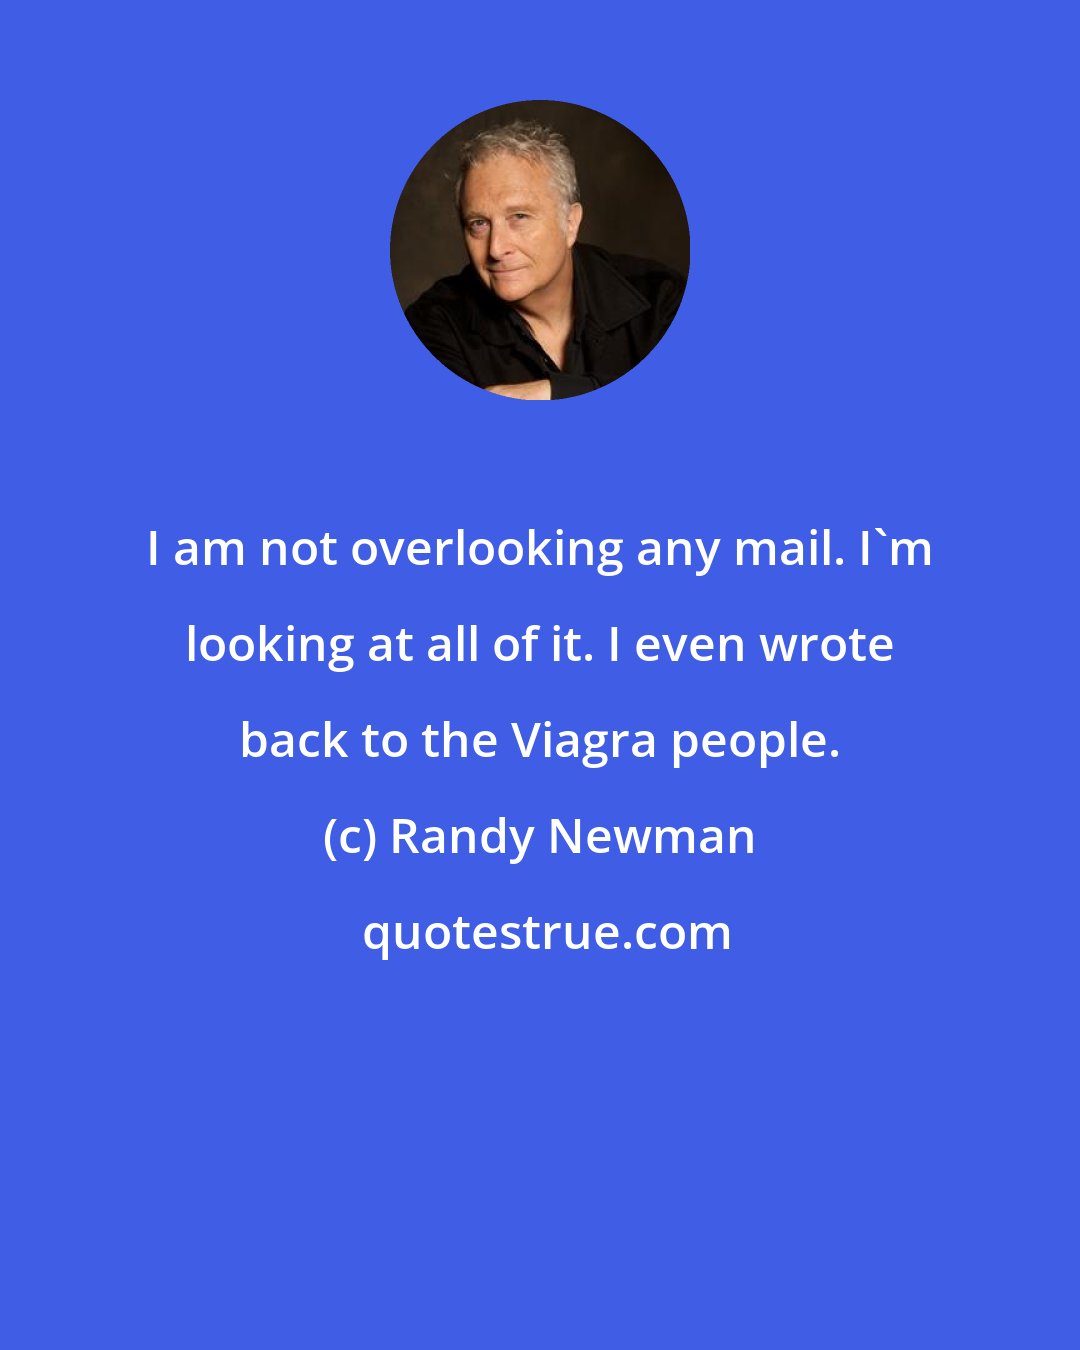 Randy Newman: I am not overlooking any mail. I'm looking at all of it. I even wrote back to the Viagra people.